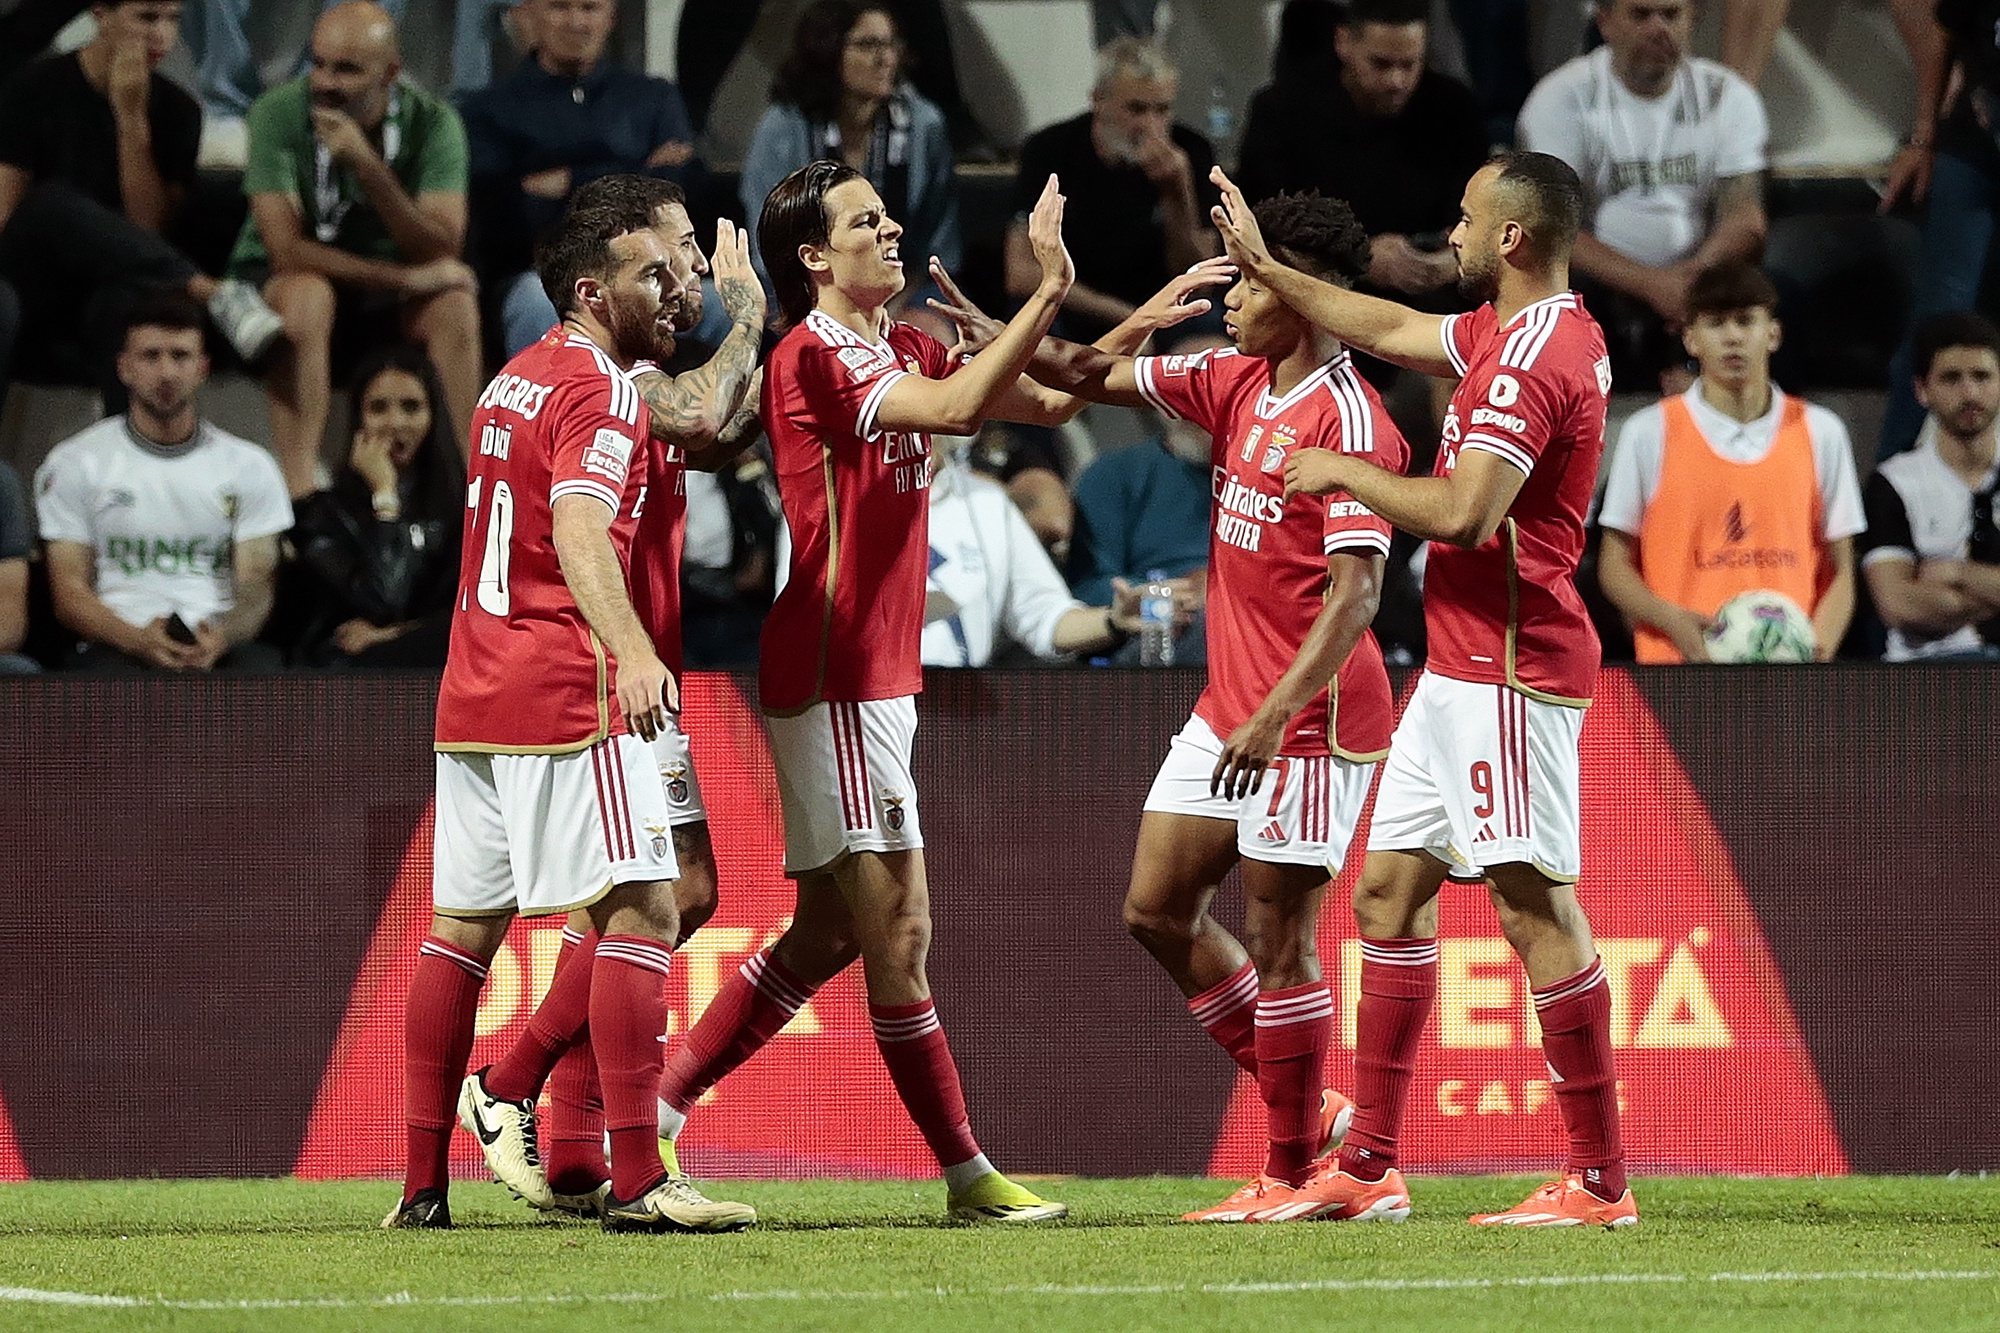 Benfica player Alvaro Carreras (C) celebrates with his team mates after scoring a goal against Farense during the Portuguese First League soccer match, held at Sao Luis stadium, in Faro, Portugal, 22 April 2024. LUIS BRANCA/LUSA